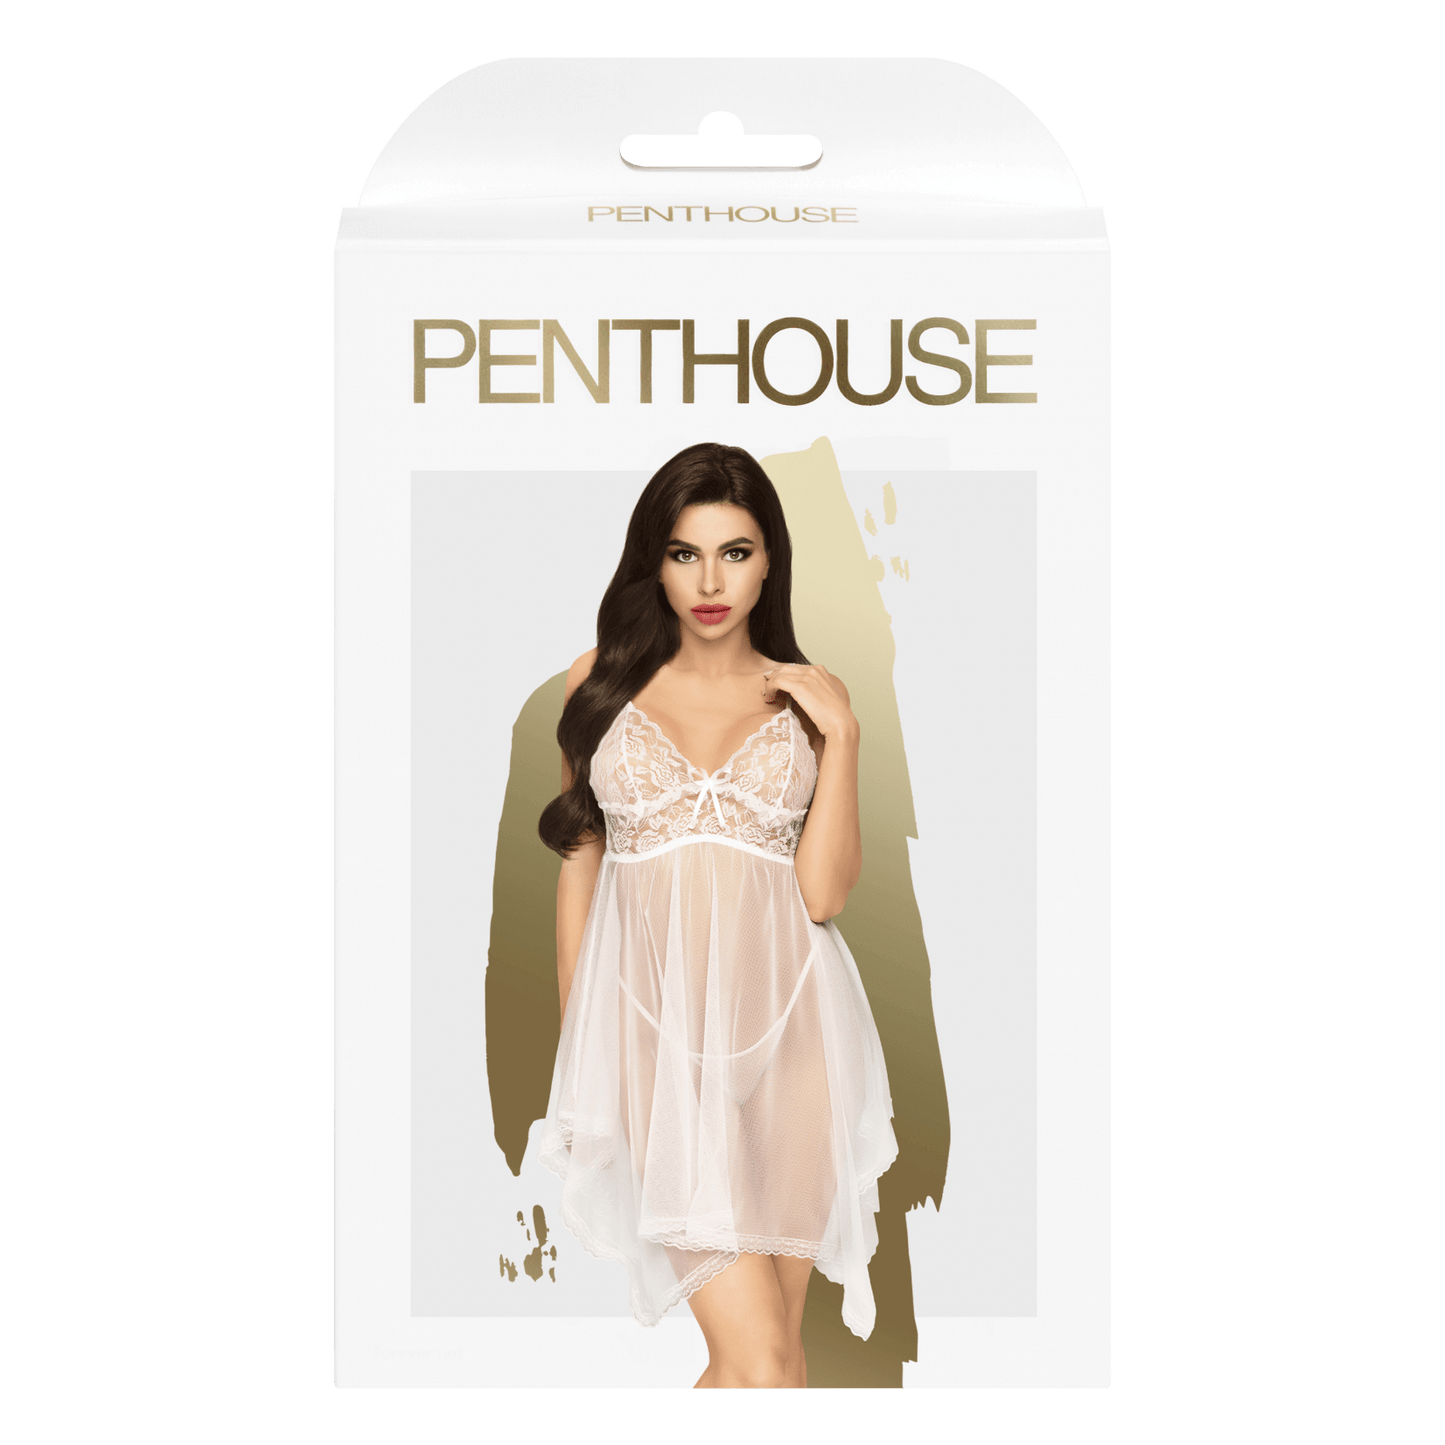 Penthouse - Naughty Doll - White - Thorn & Feather Sex Toy Canada